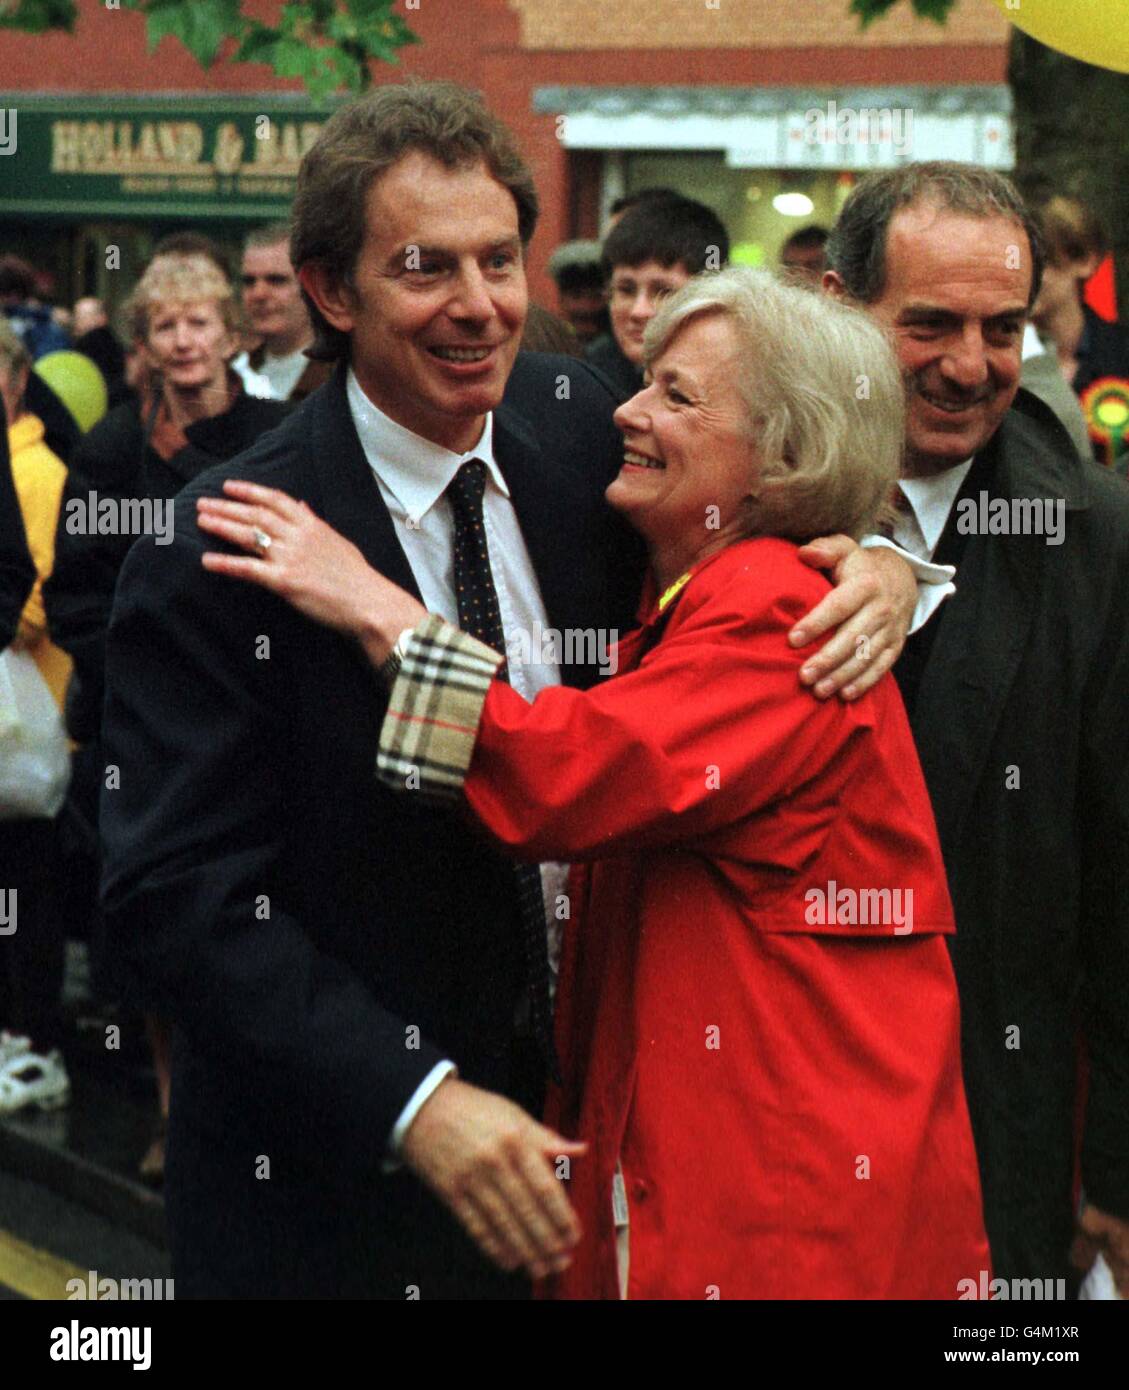 British Prime Minister Tony Blair and Glenys Kinnock, the MEP for South East Wales, embrace during Mr Blair's visit to Pontypridd in Wales. Stock Photo